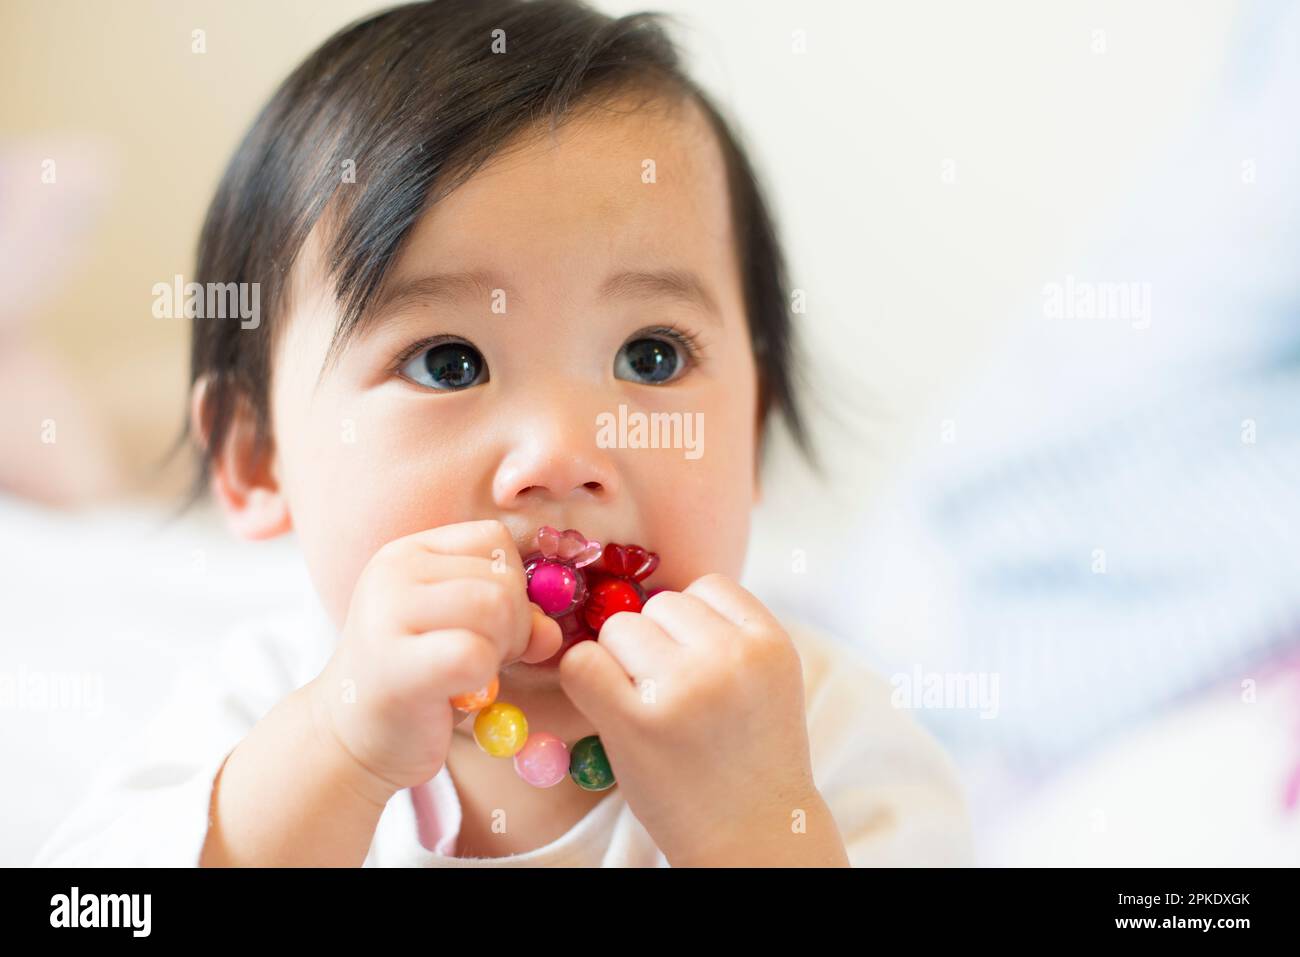 Baby with toy in mouth Stock Photo